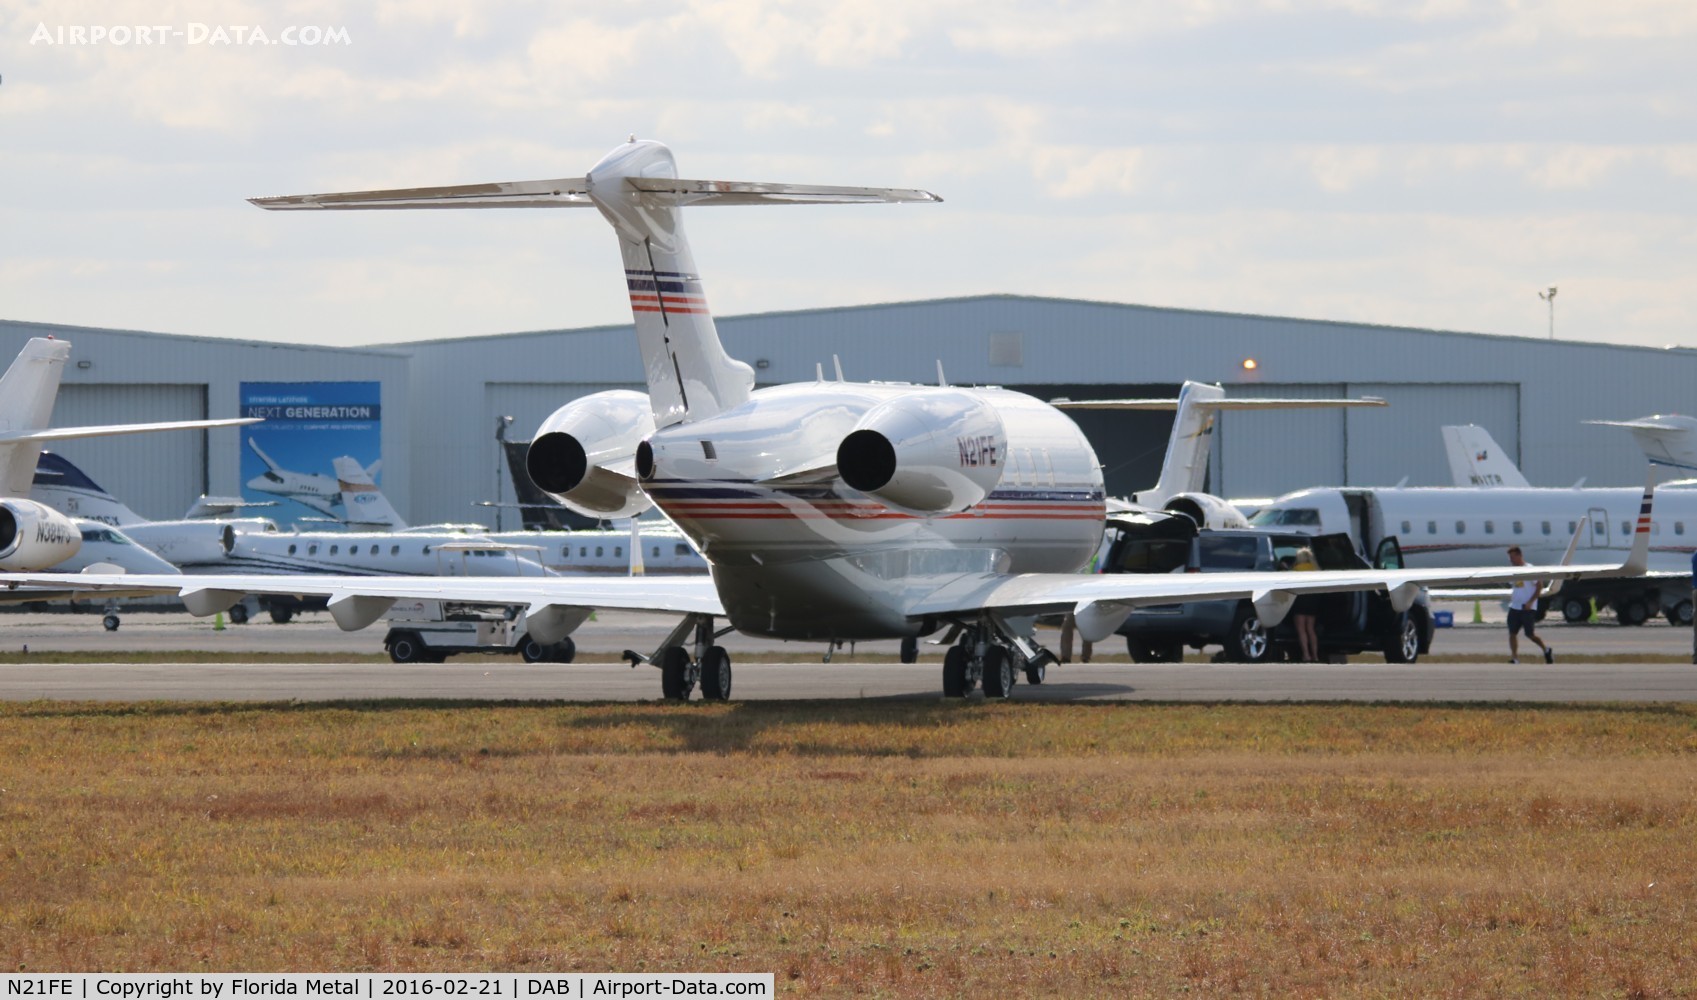 N21FE, 2012 Bombardier Challenger 300 (BD-100-1A10) C/N 20352, Challenger